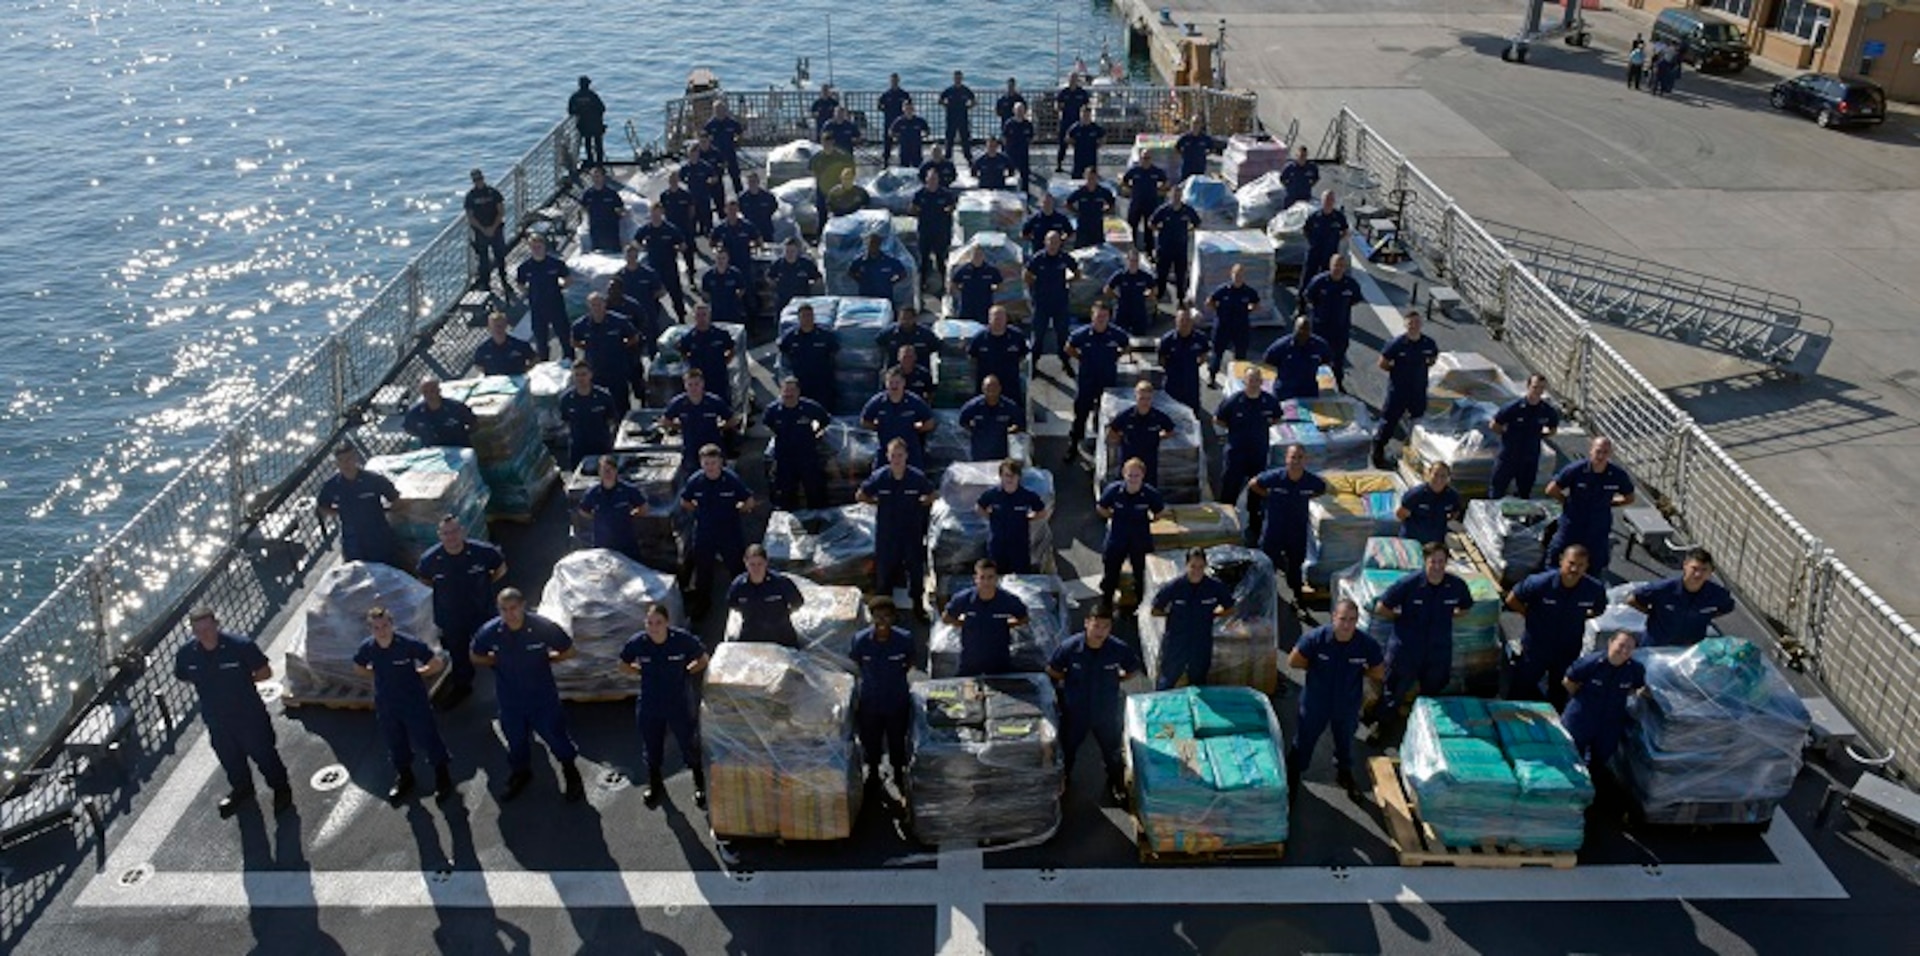 Members of the Coast Guard Cutter Hamilton crew stand next to approximately 26.5 tons of cocaine Dec. 15, 2016 aboard the cutter at Port Everglades Cruiseport in Fort Lauderdale, Florida. The crew of the Coast Guard Hamilton offloaded the cocaine in Port Everglades worth an estimated $715 million wholesale seized in international waters off the Eastern Pacific Ocean since Oct. 1, 2016. Coast Guard photo by Eric D. Woodall